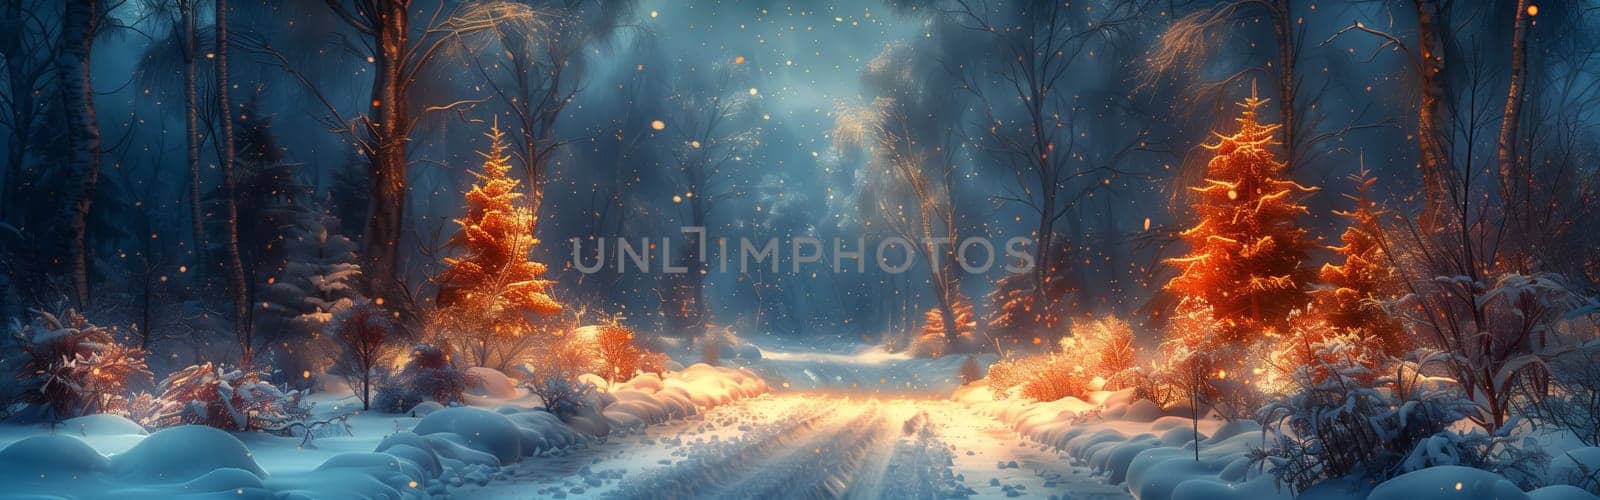 A festive atmosphere with snowy forest, Christmas trees, and electric blue sky by richwolf